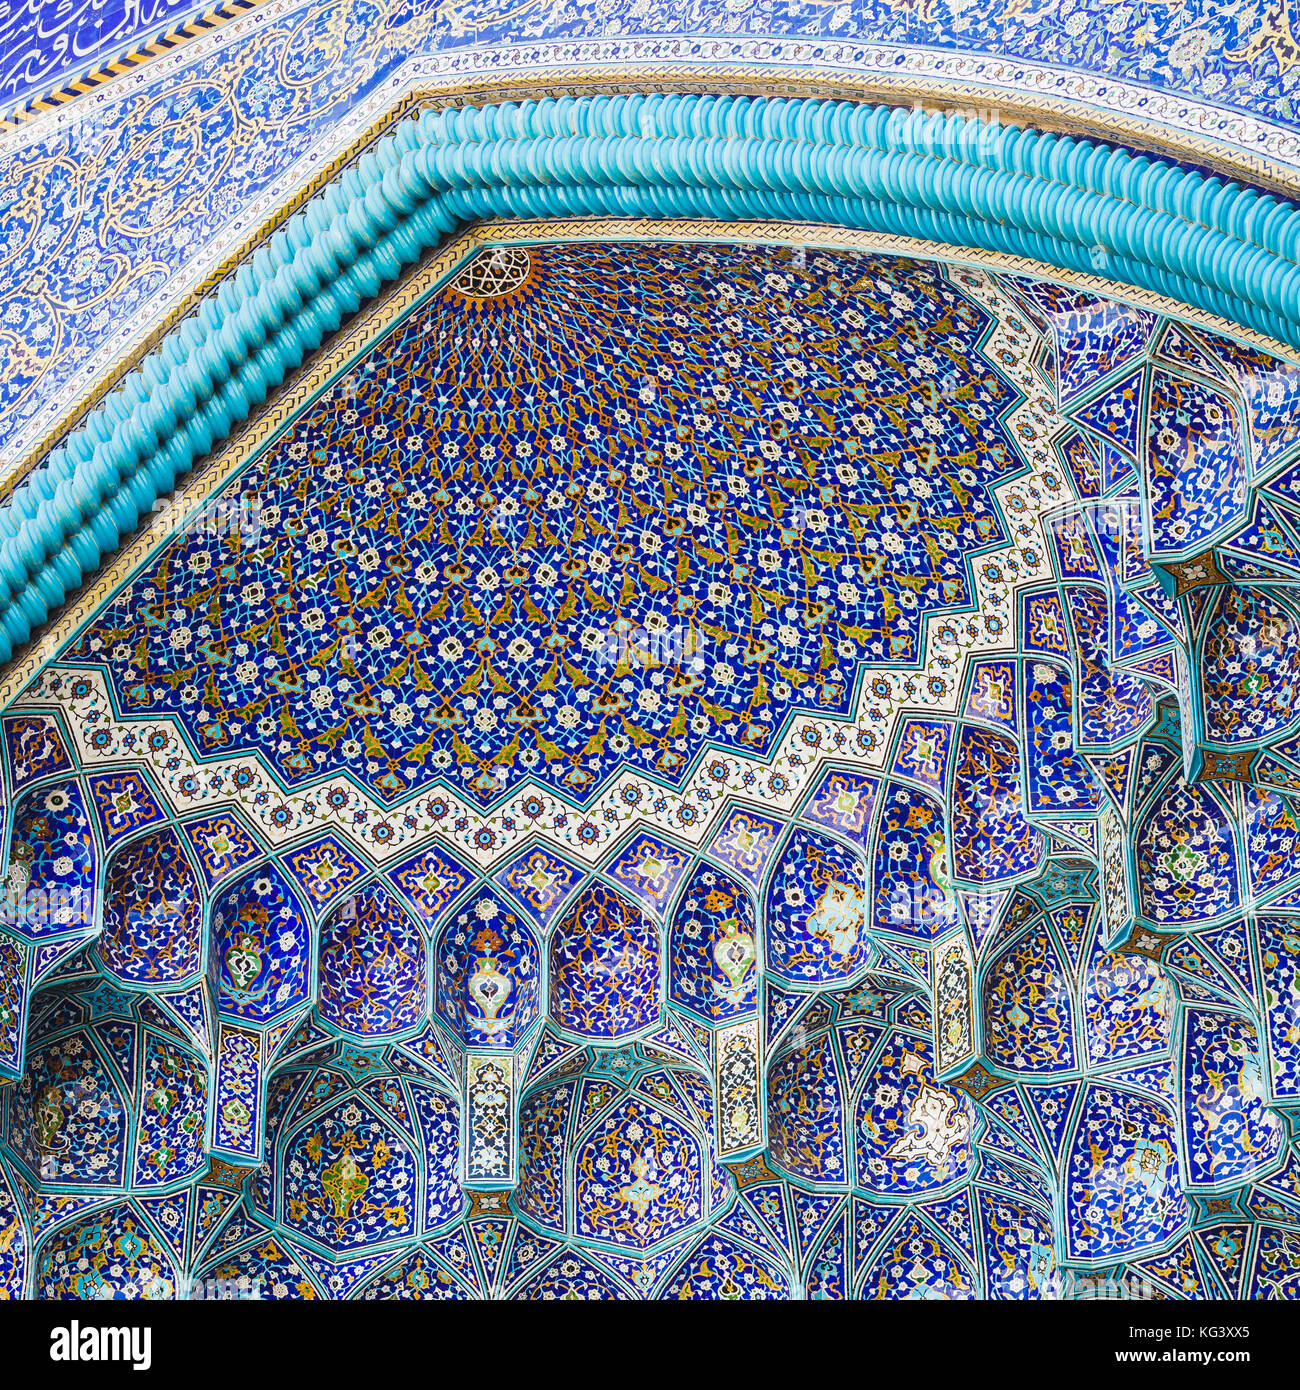 Details Of Sheikh Lotfollah Mosque In Isfahan Iran Stock Photo Alamy